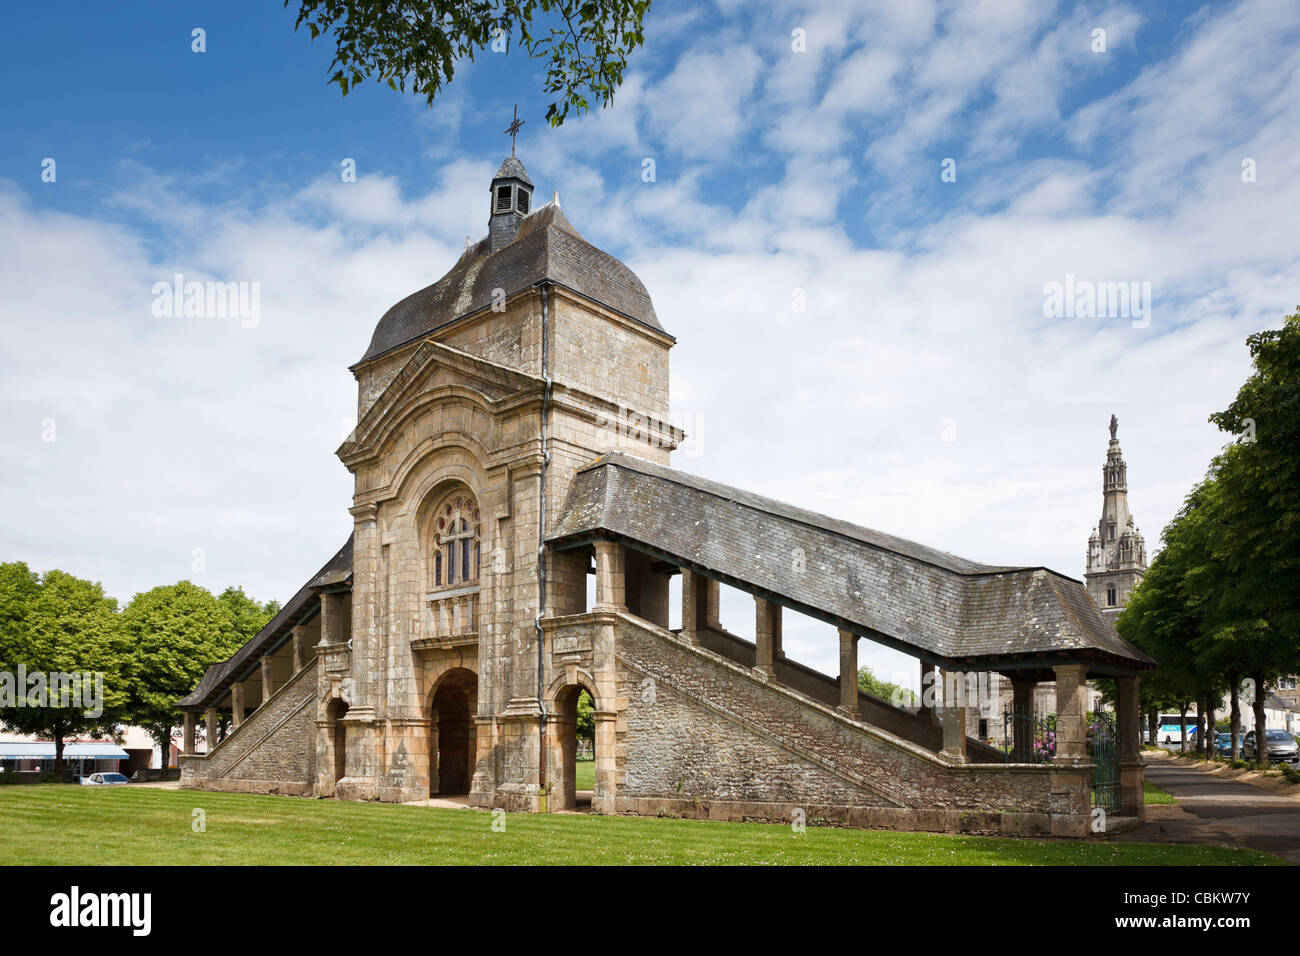 Scala Sancta, Holy Stairs, at St Anne d'Auray, Brittany, France Stock Photo